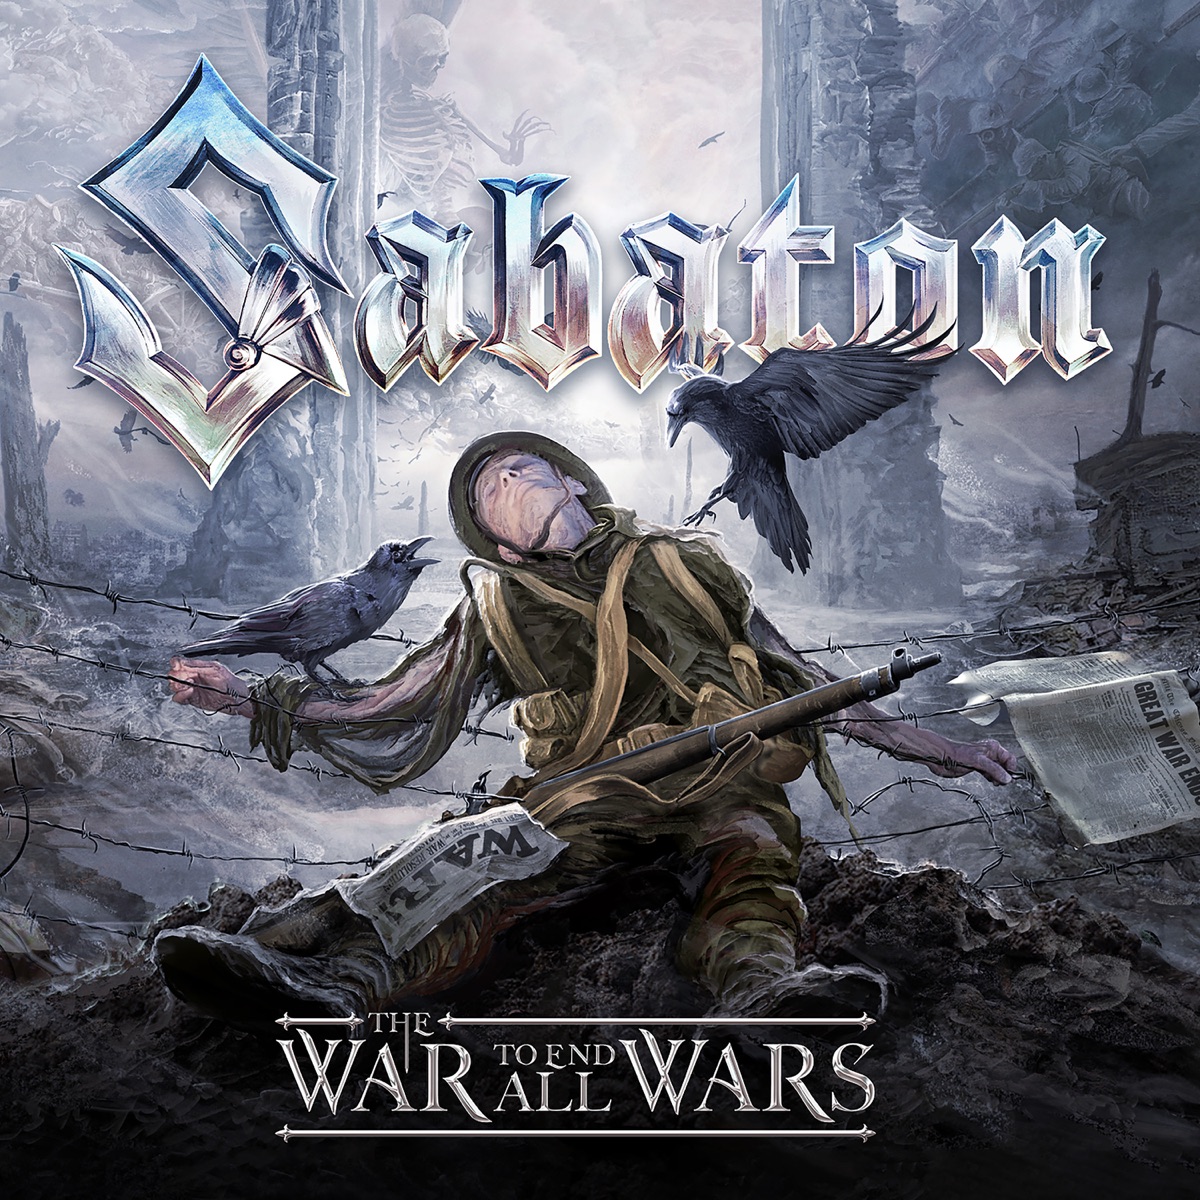 sabaton-the_war_to_end_all_wars_a.jpg?932932